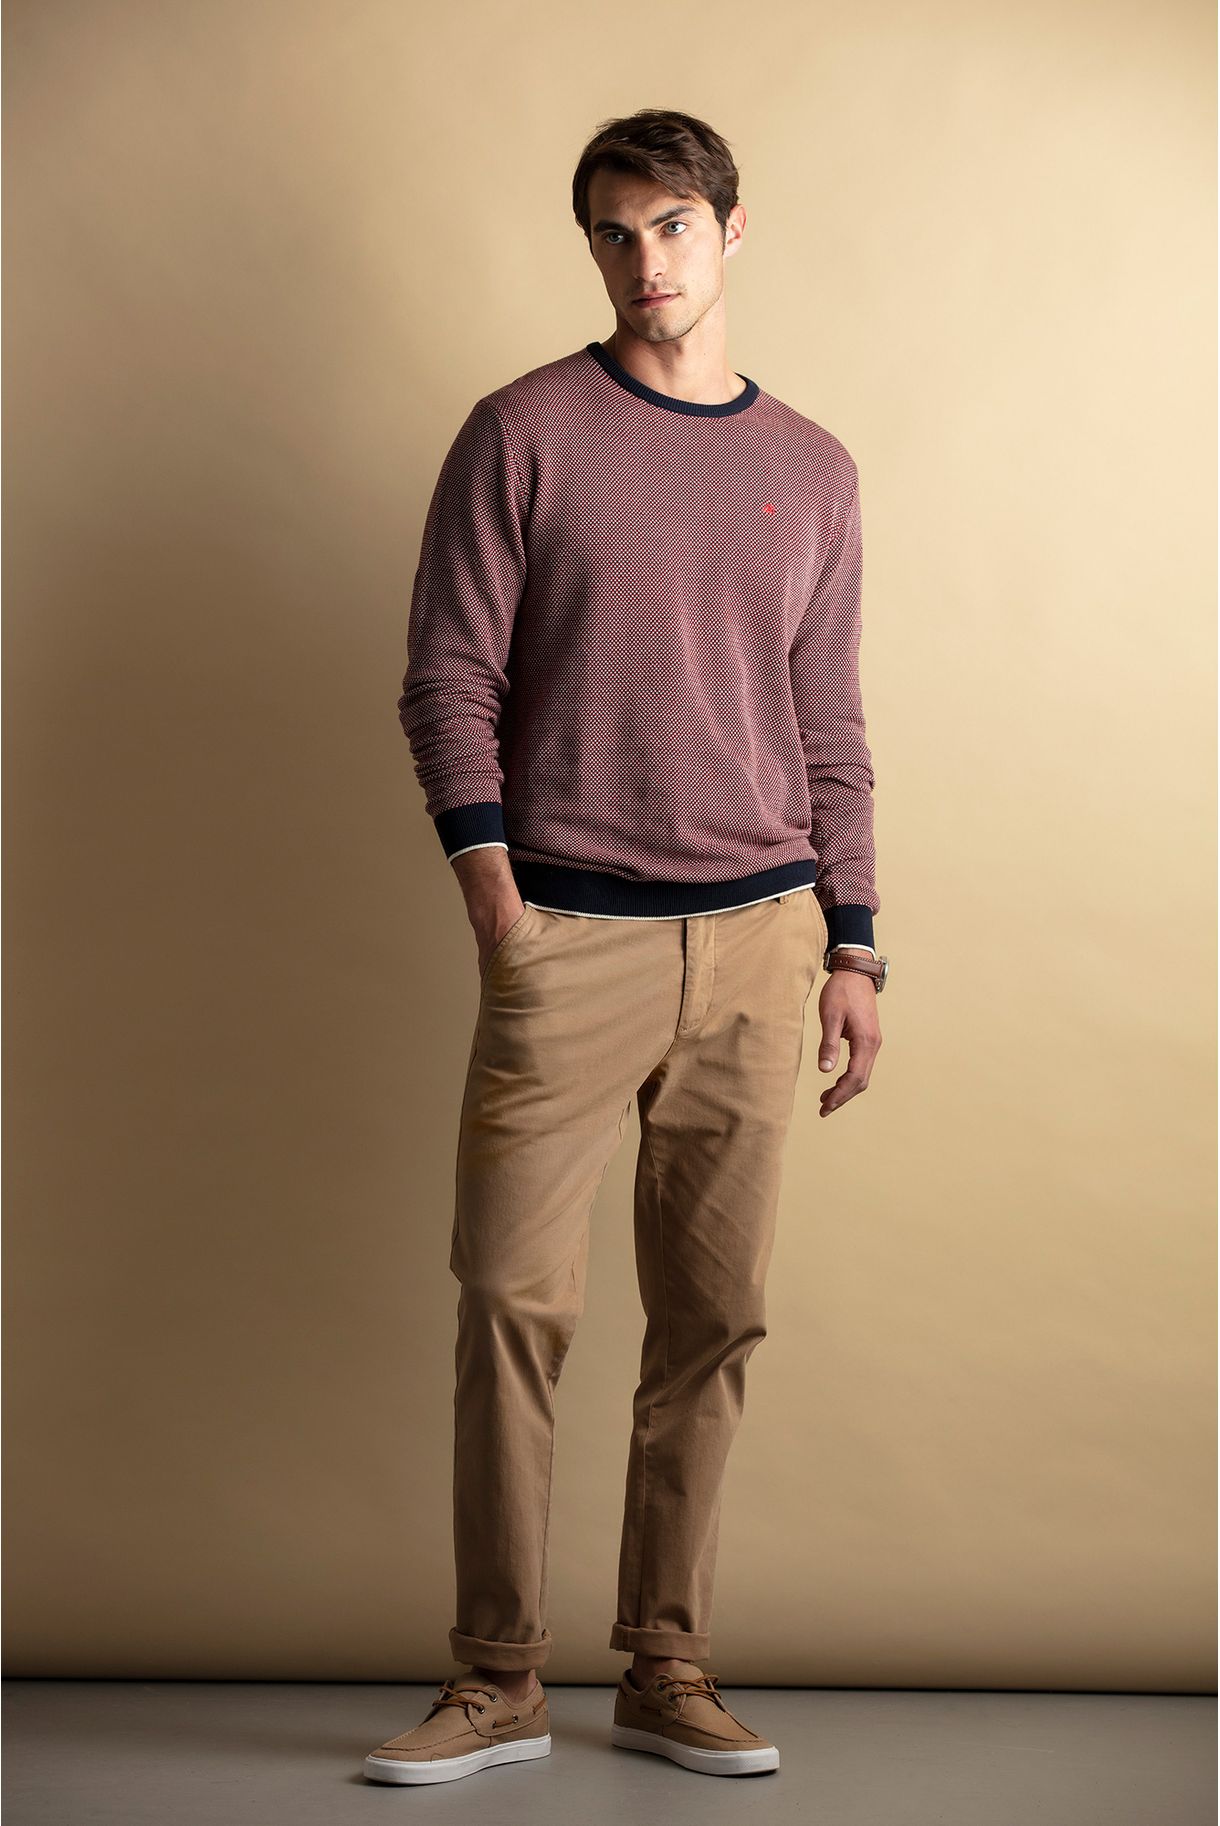 oxford structure knit sweater